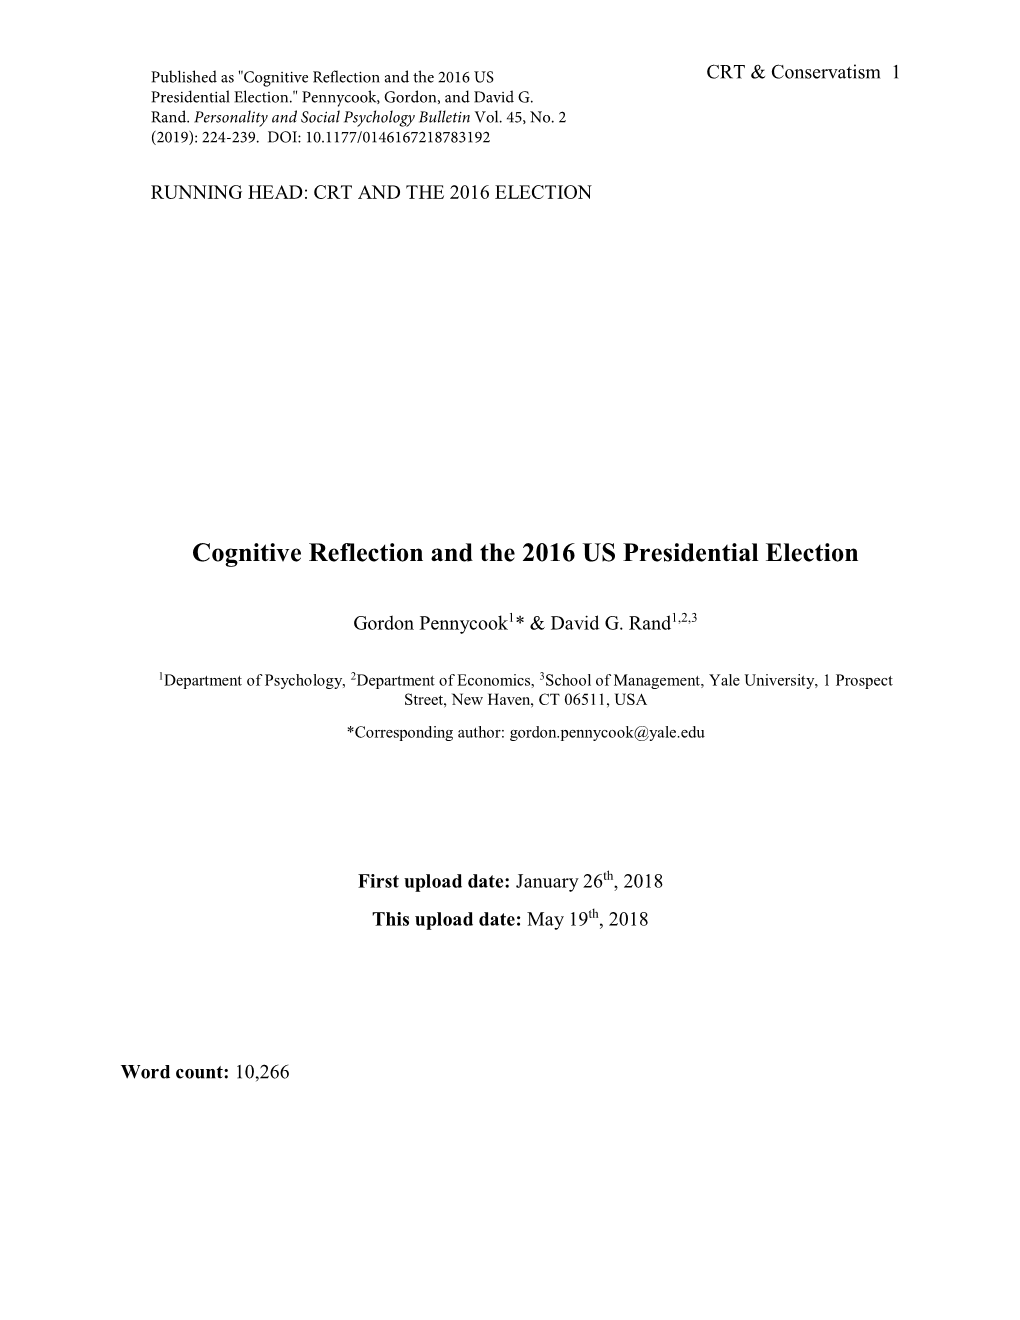 Cognitive Reflection and the 2016 US Presidential Election